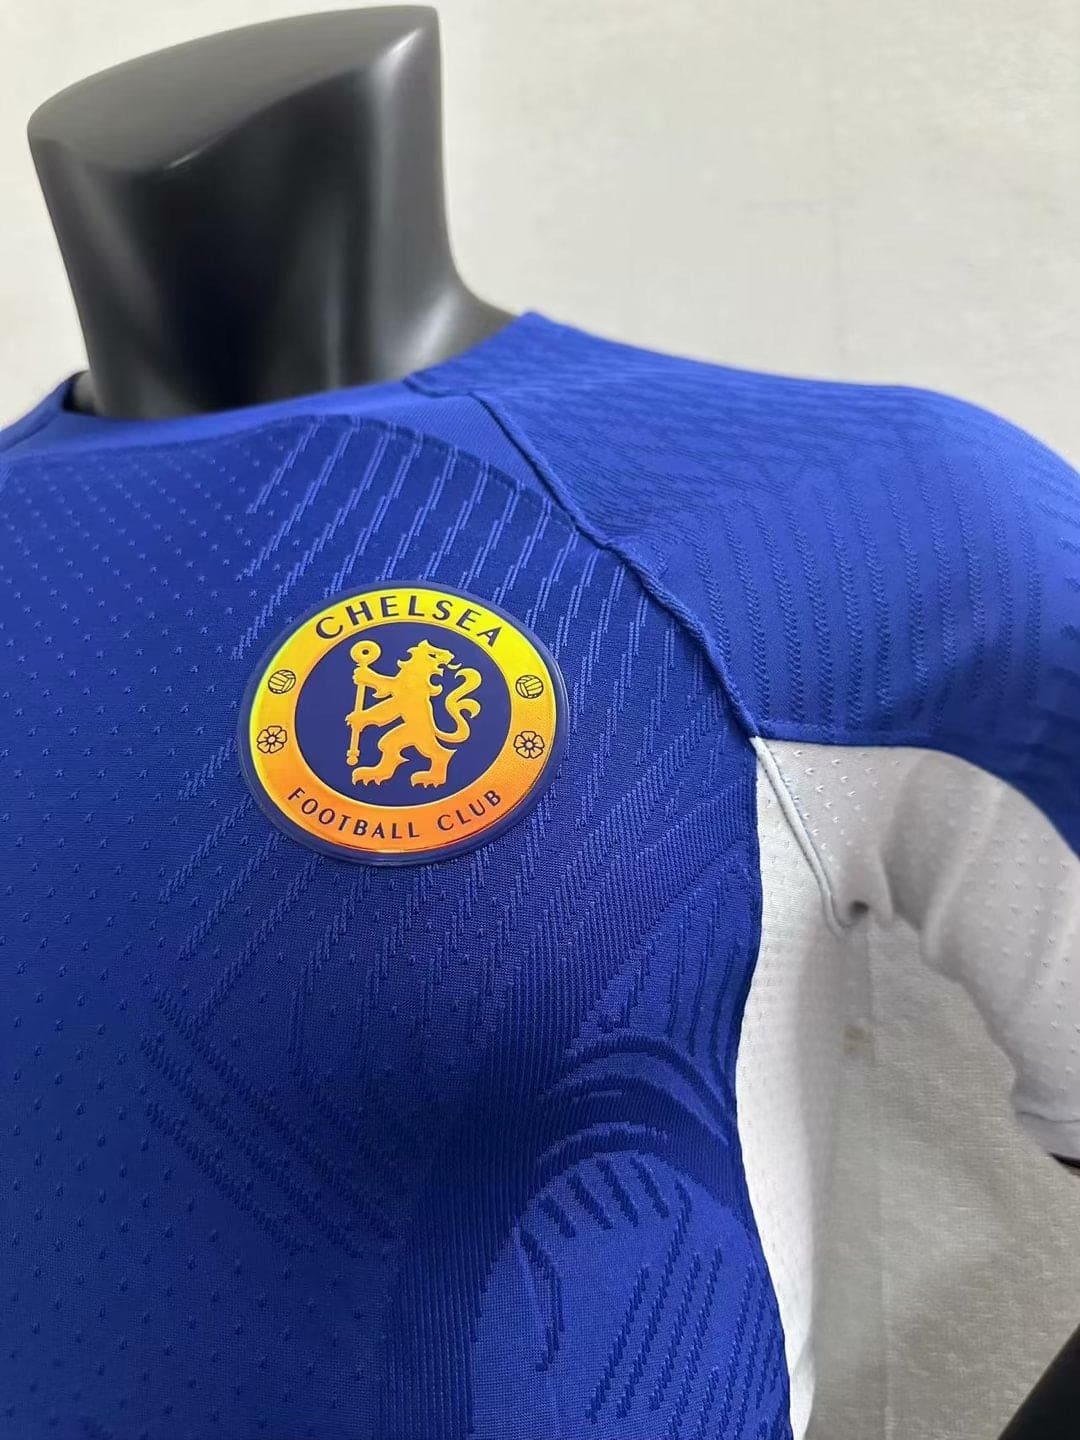 Chelsea FC 23/24 Home Kit Player Version